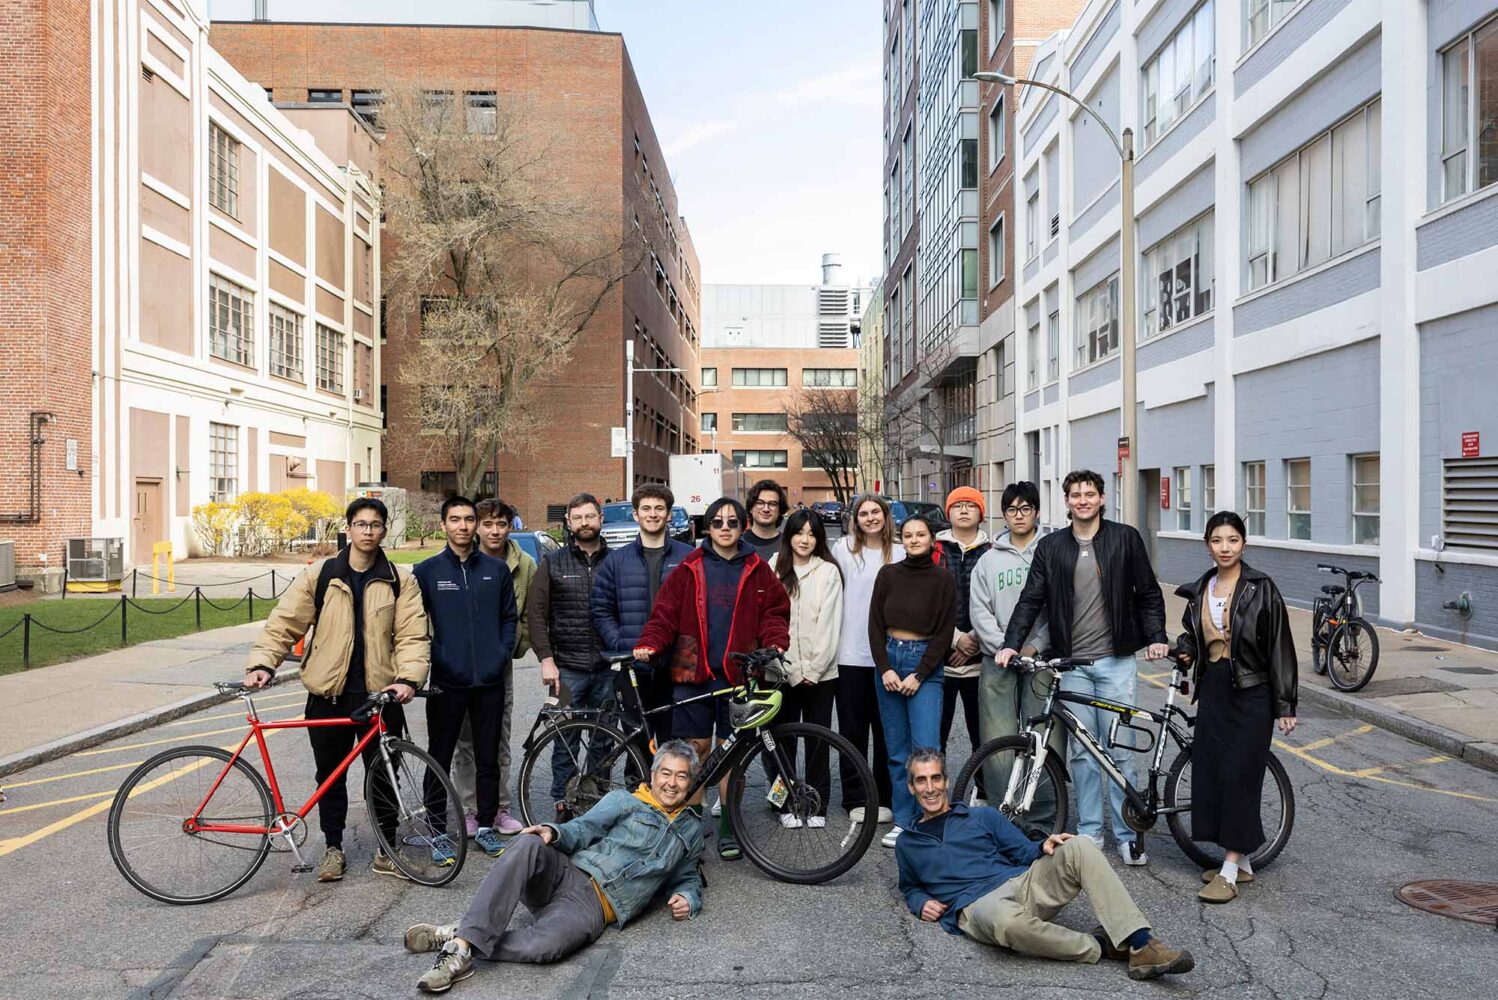 Photo: A large group of young people, likely college students, with bicycles stand on an urban street in Boston University's campus